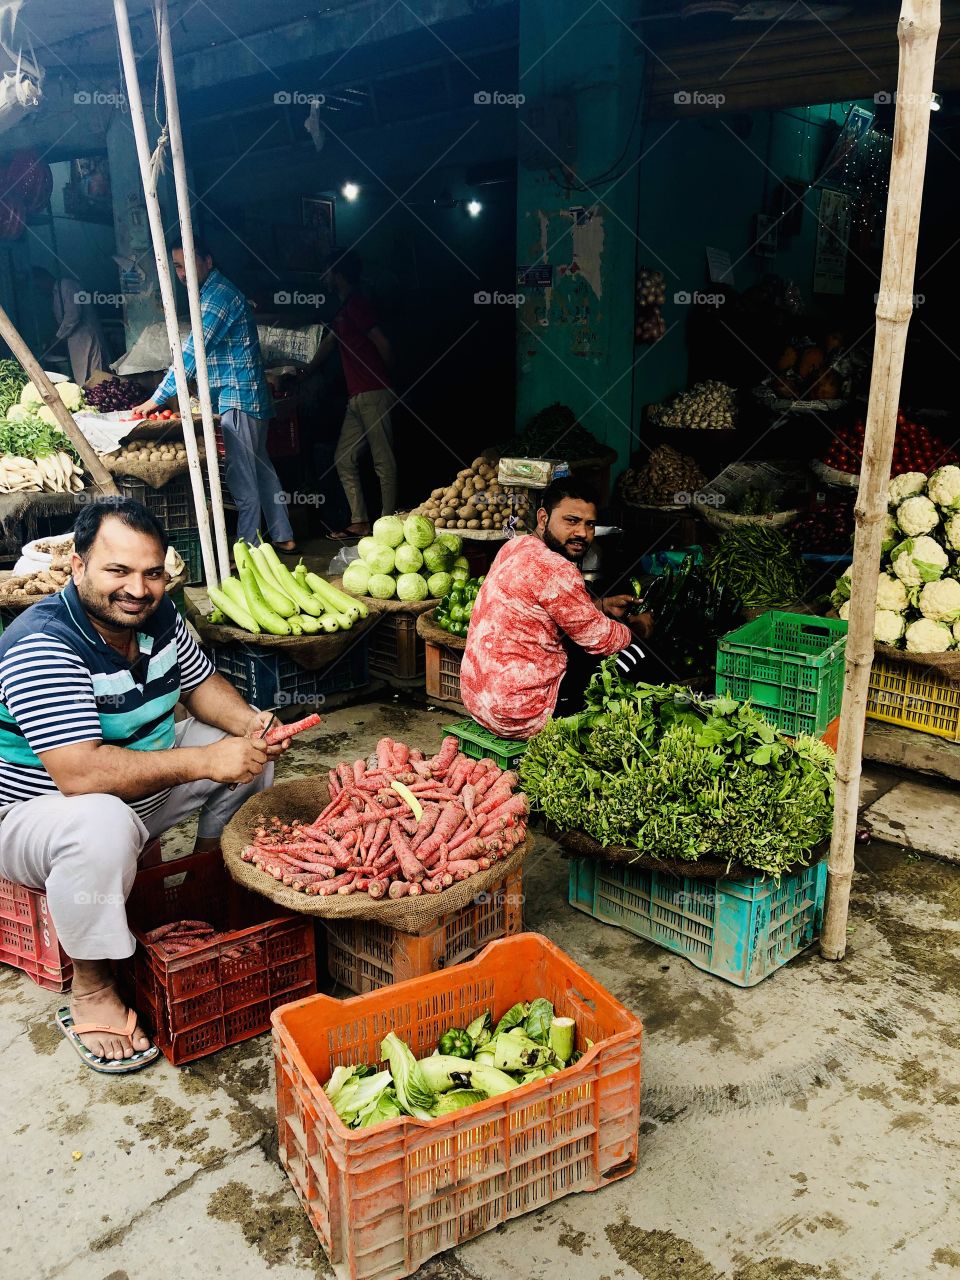 Vegetables & Fruit Markets Streets of India 🇮🇳